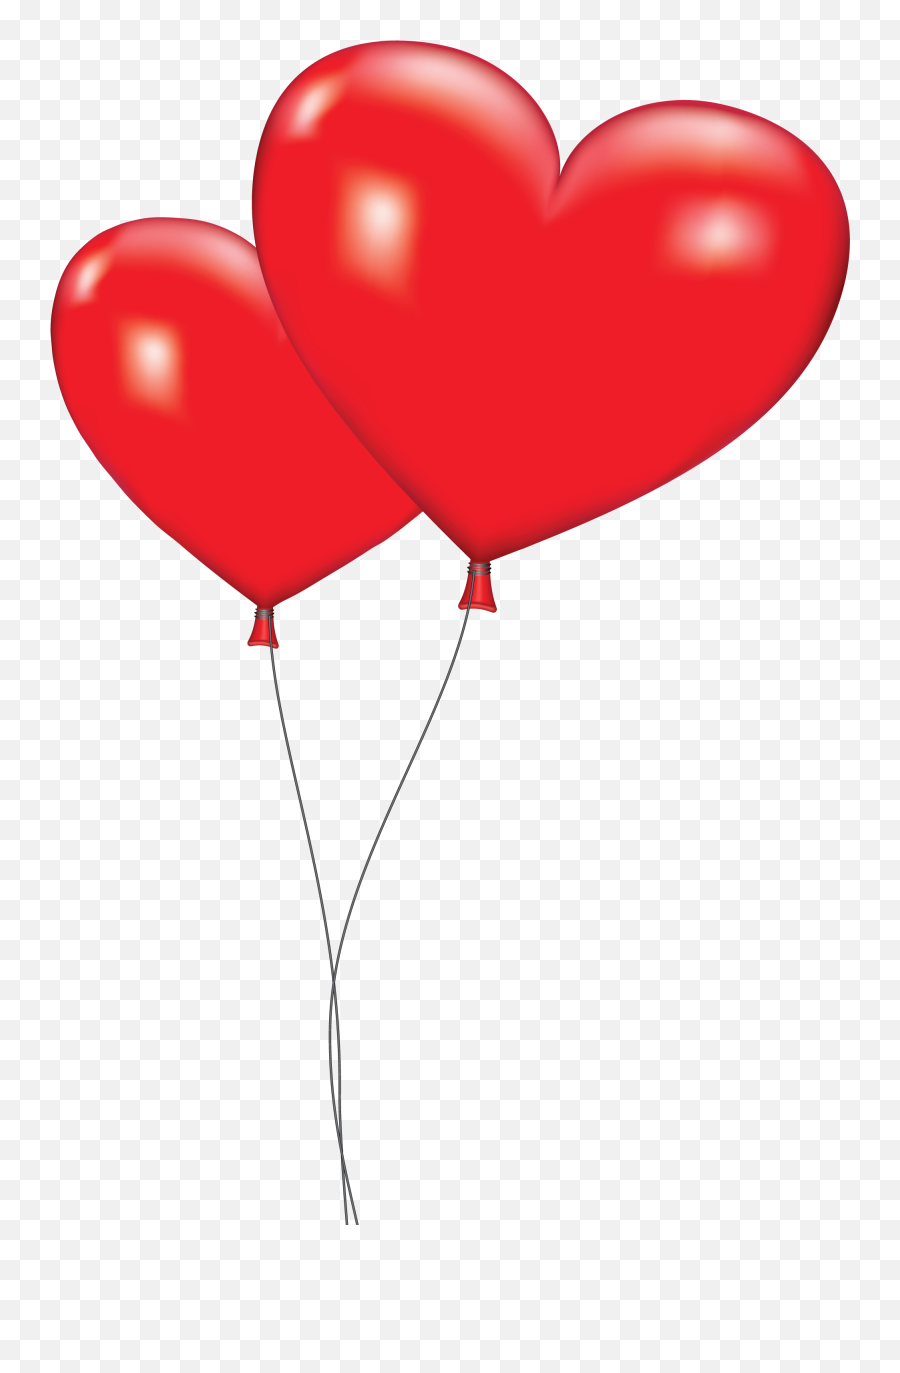 Free Picture Of Red Heart Download Free Clip Art Free Clip - Transparent Background Heart Balloon Clipart Emoji,Red Beating Heart Emoji Meaning